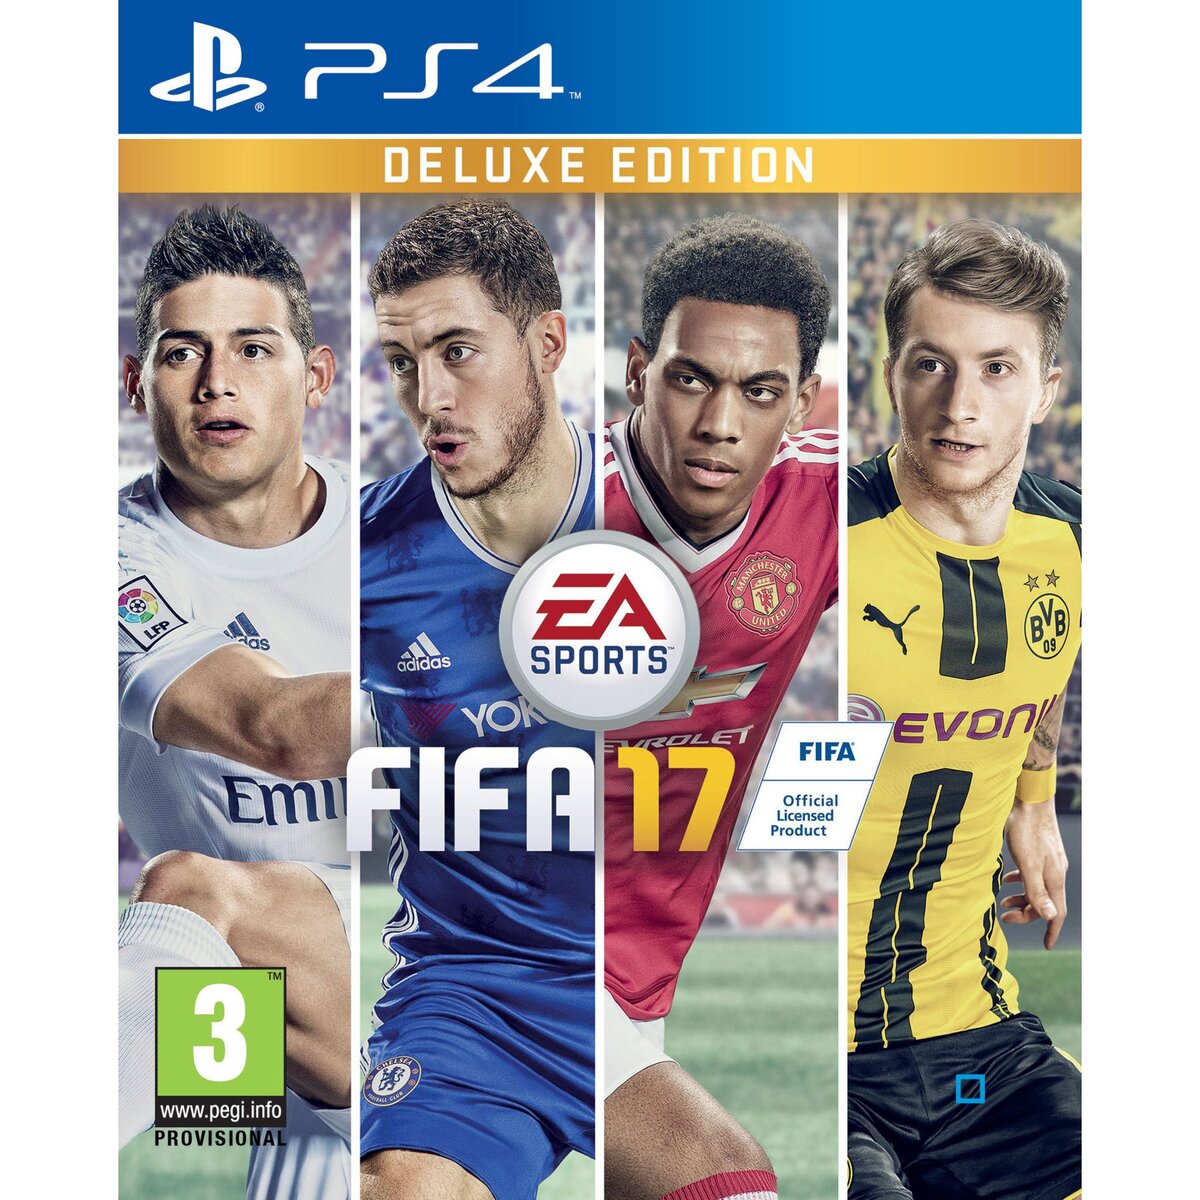 FIFA 17 Deluxe Edition PS4